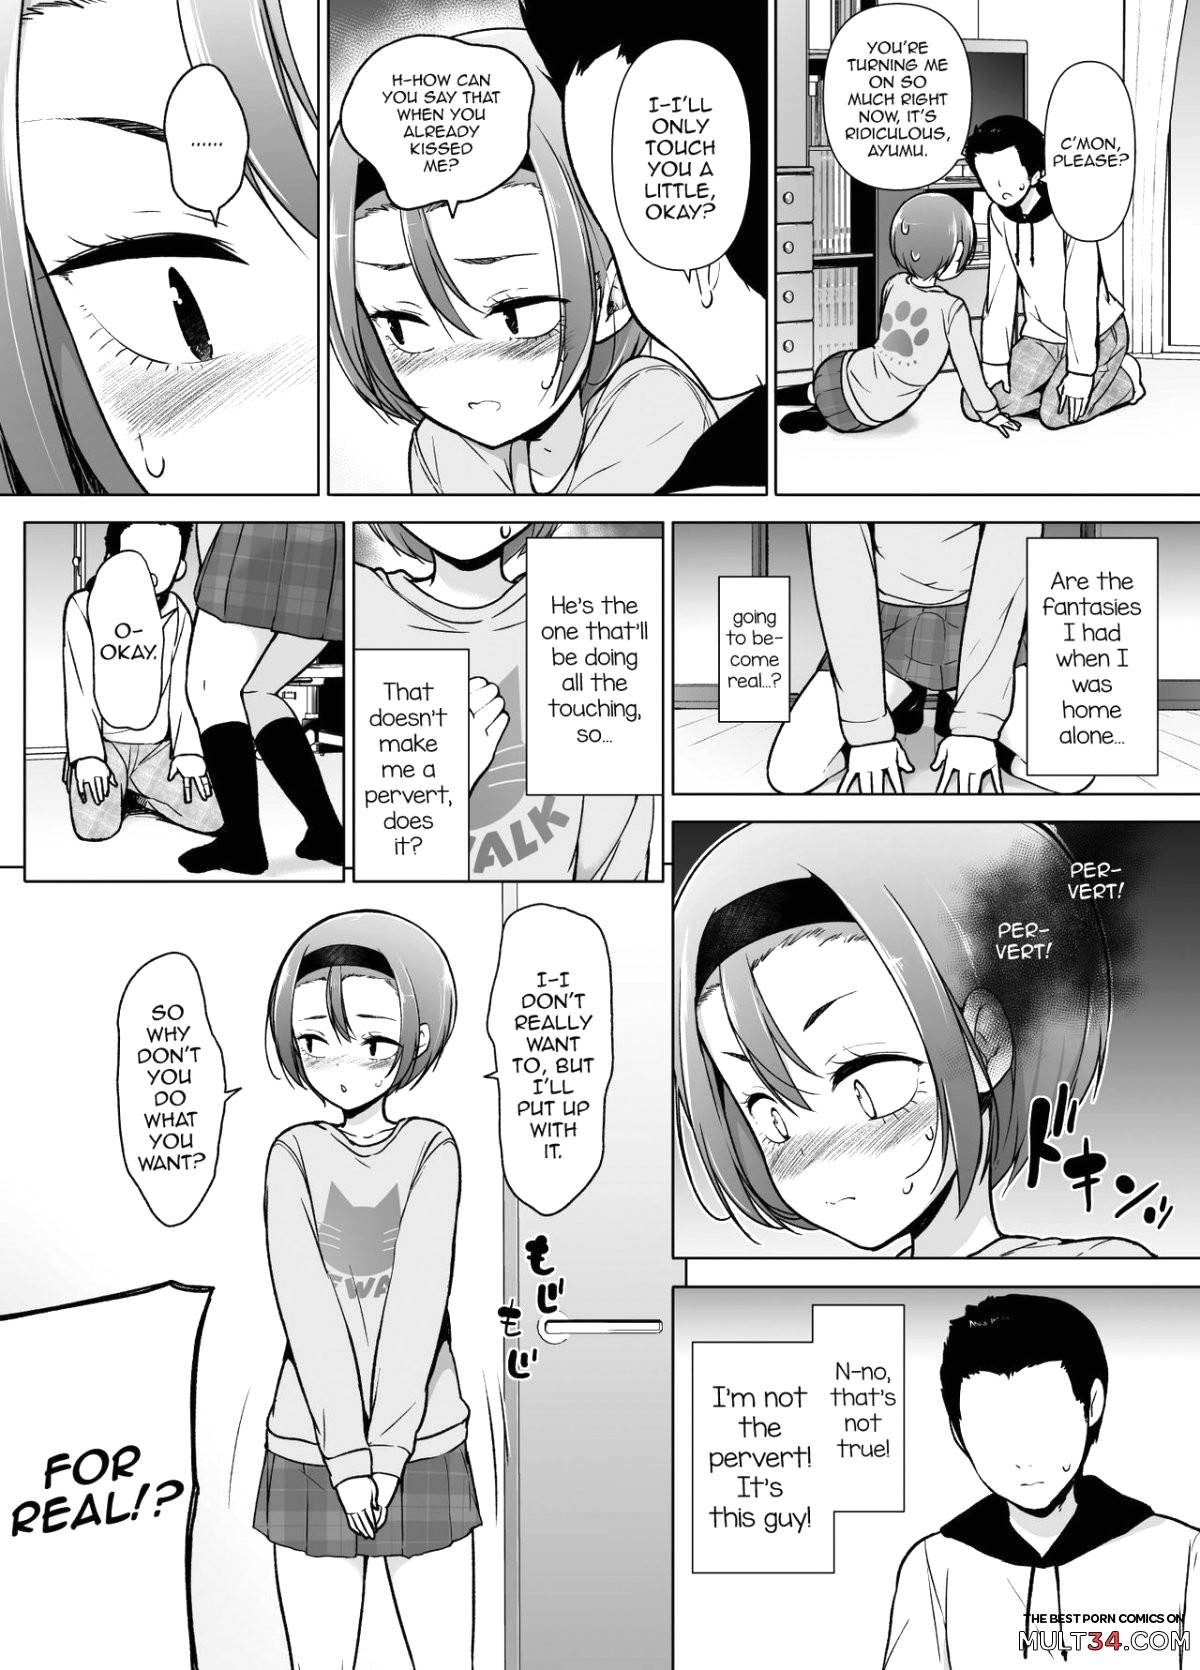 The Pervert page 15